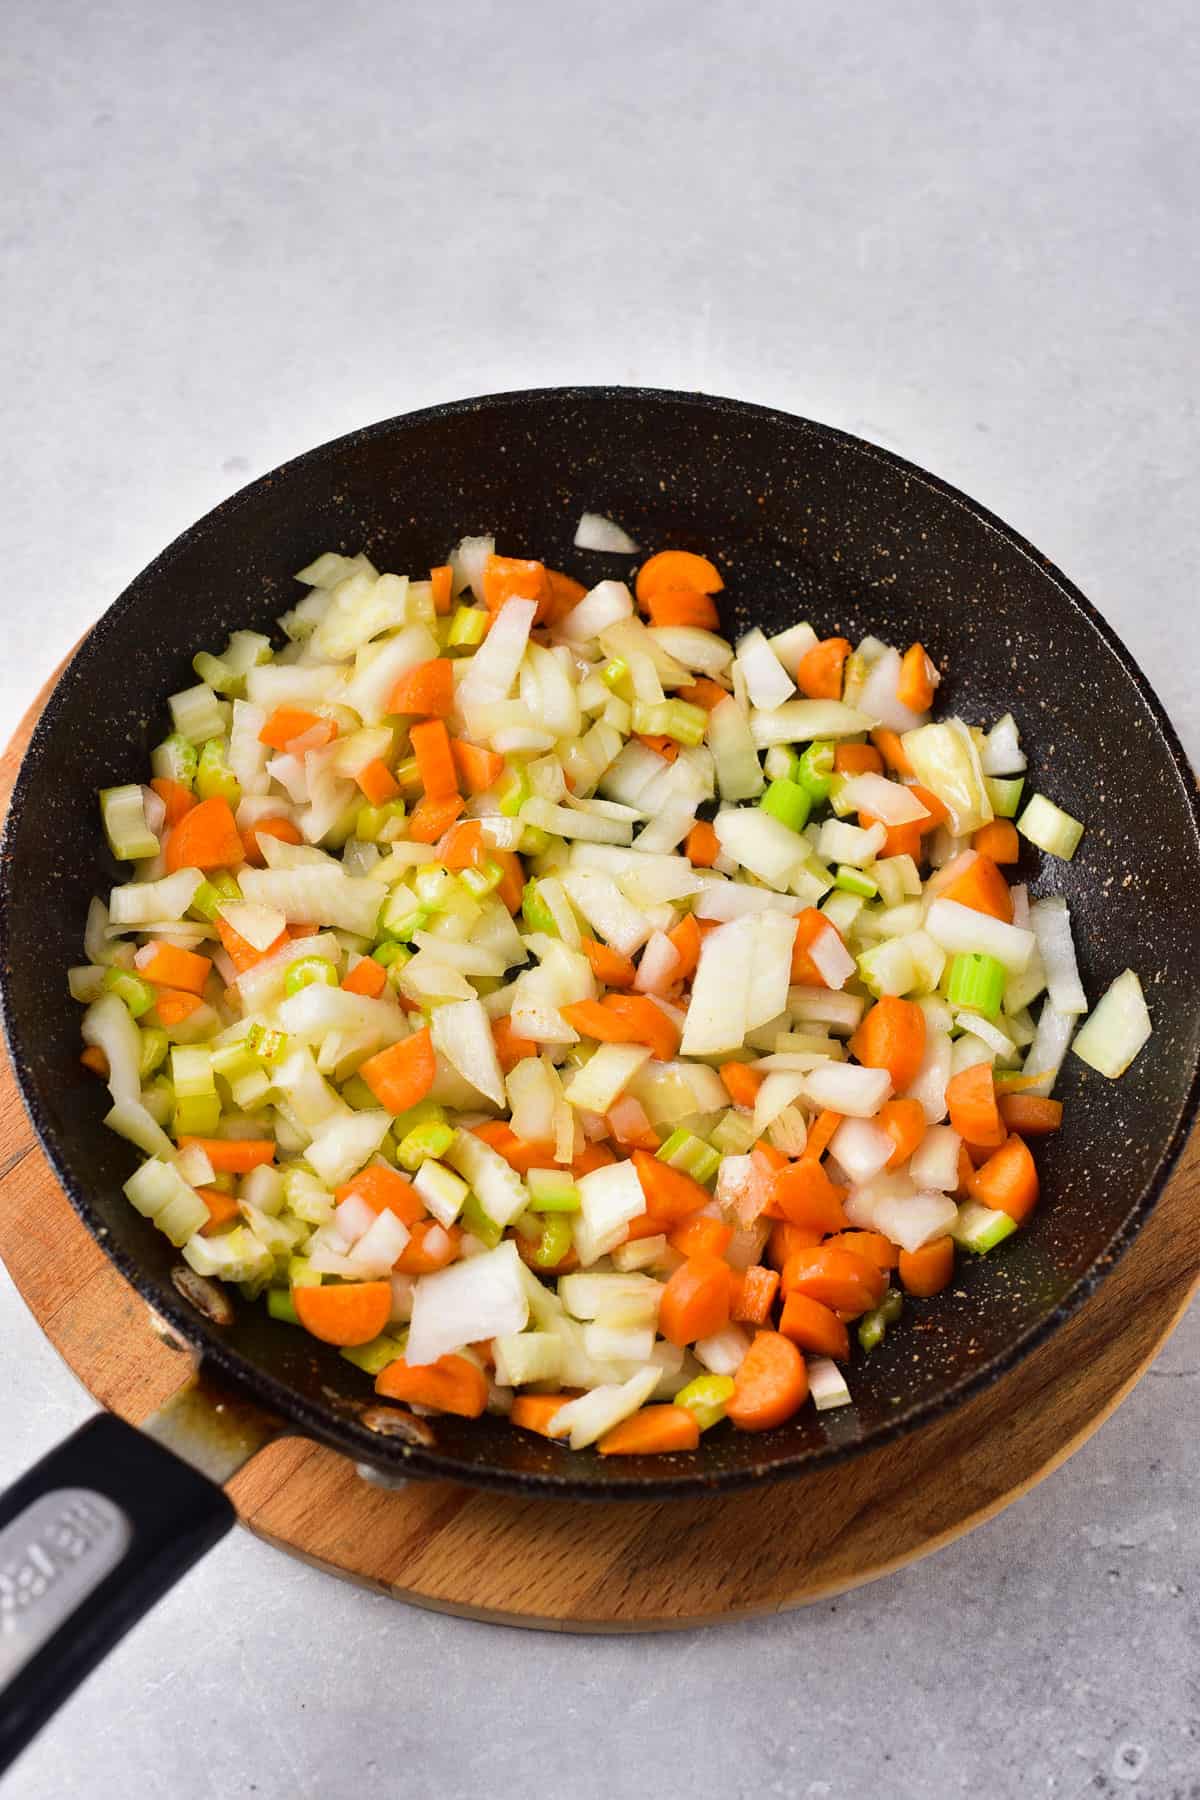 cooking chopped vegetables in oil